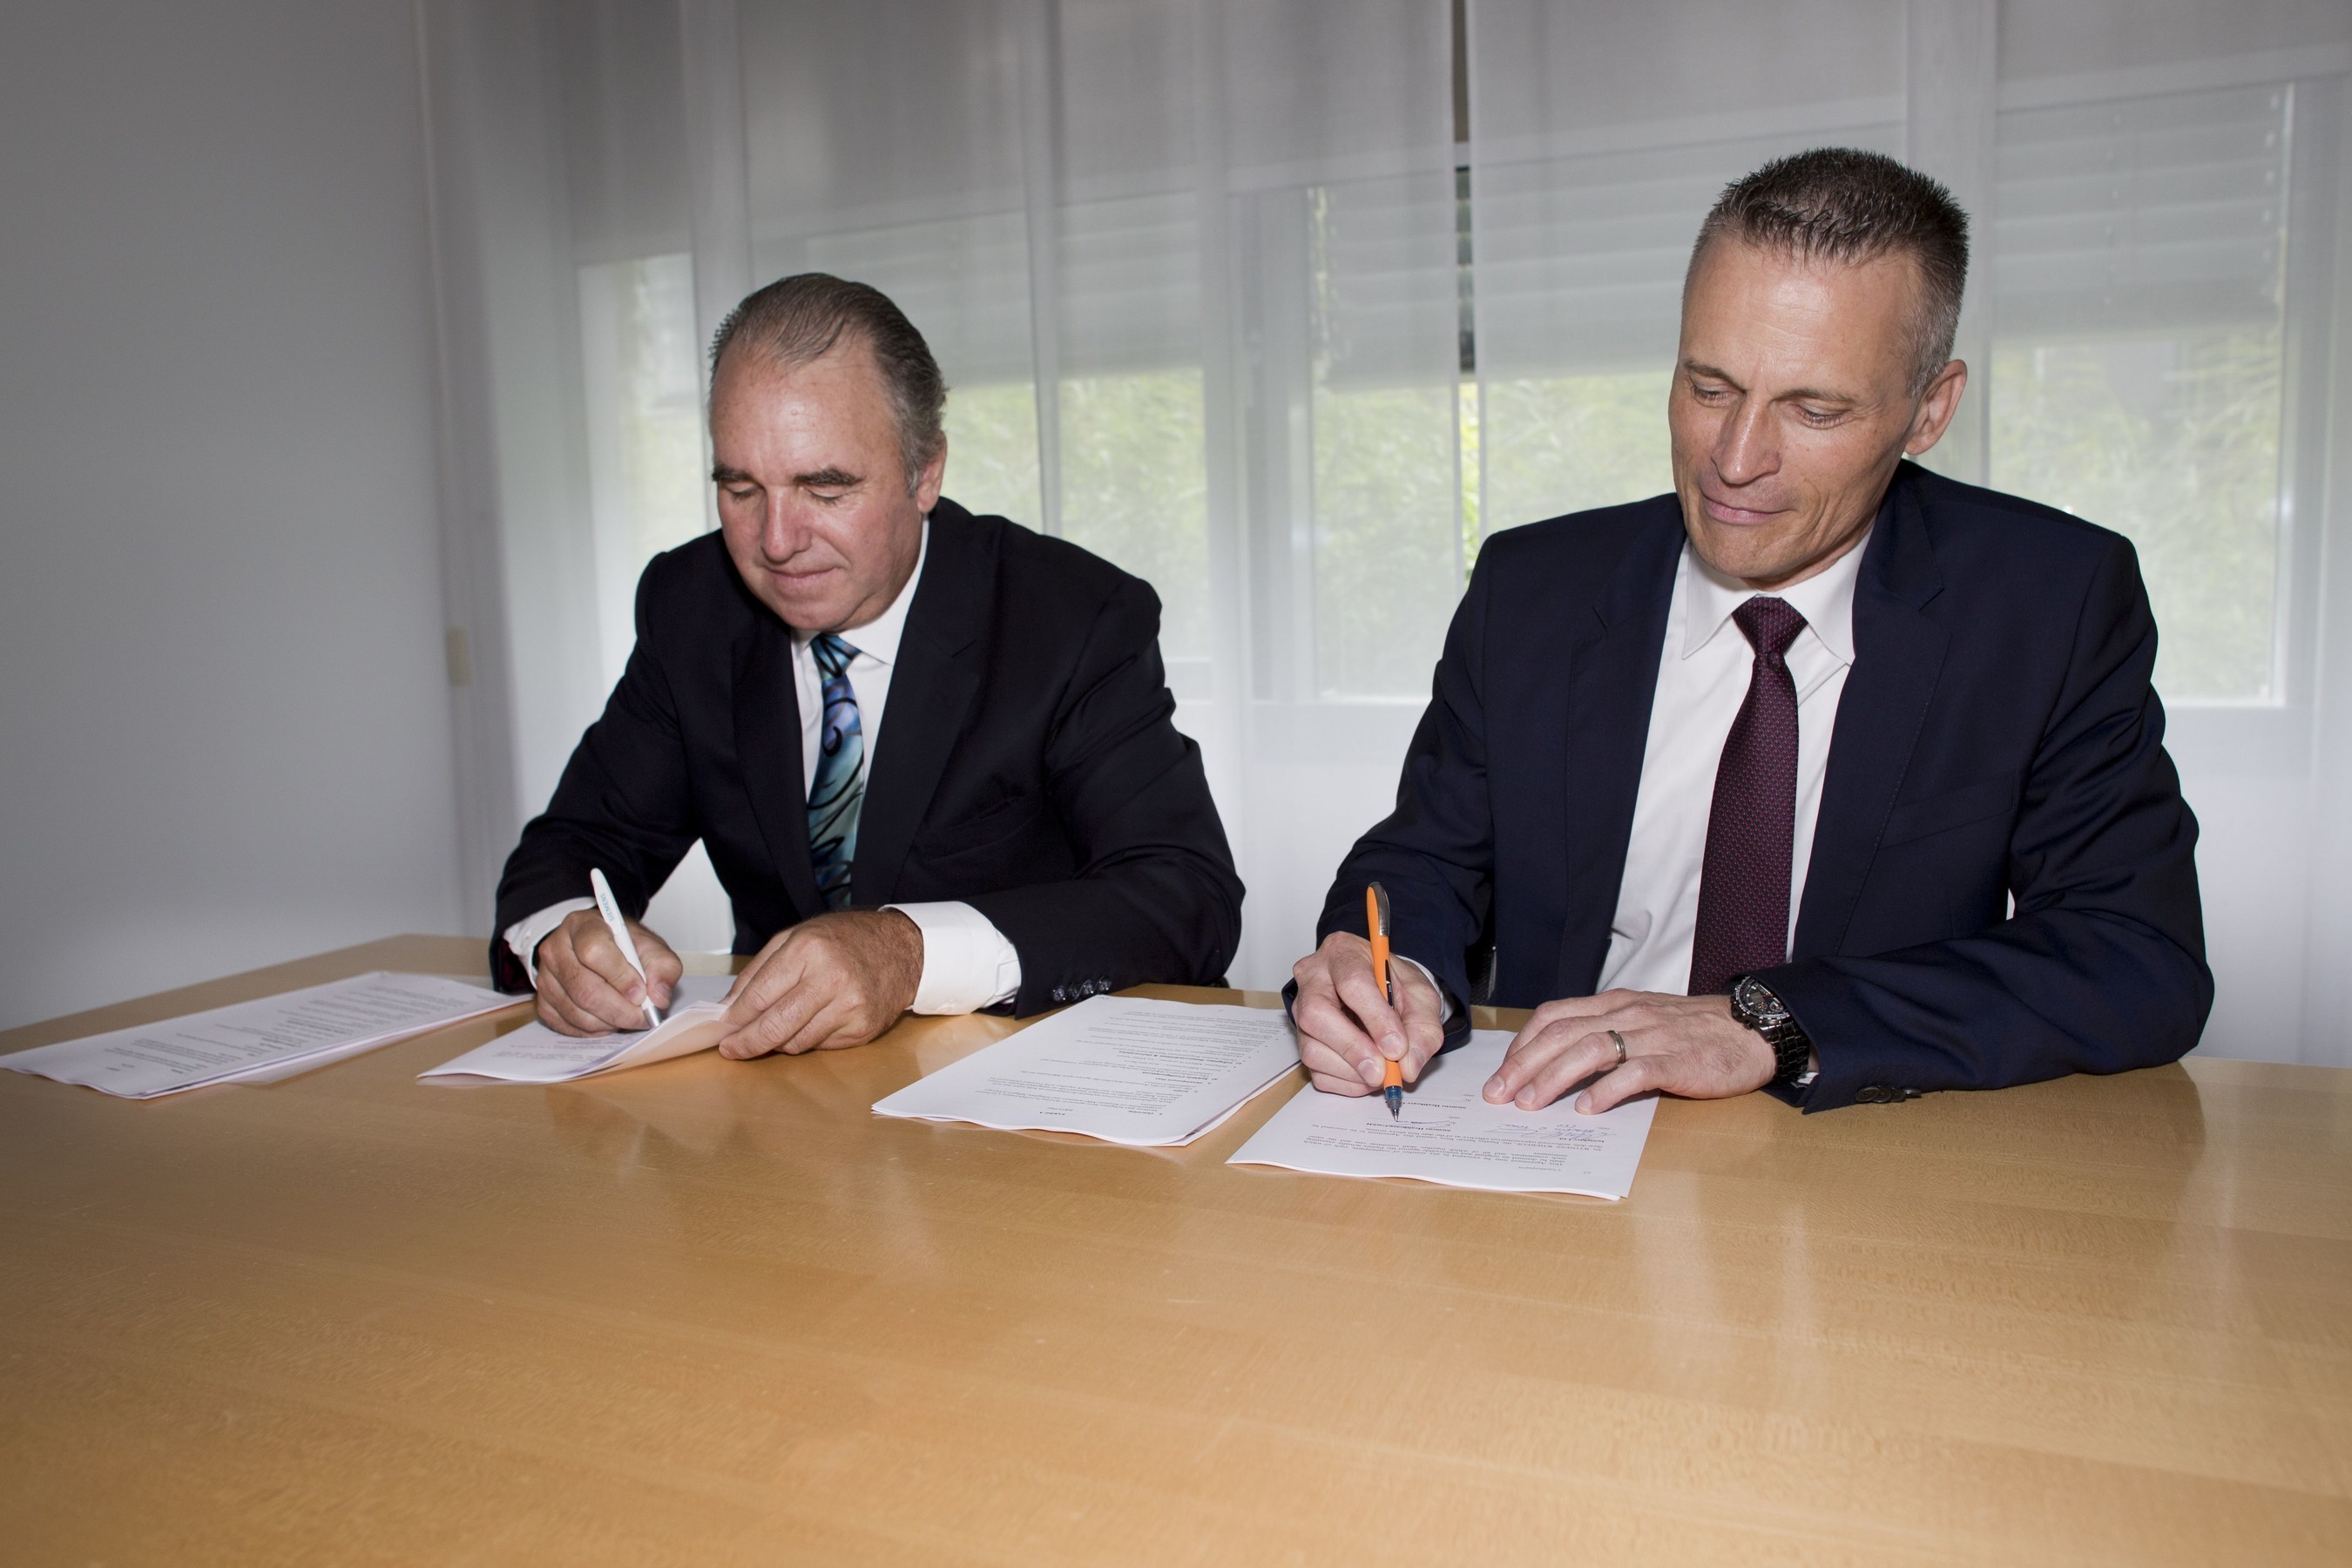 SIEMENS and INSIGHTEC sign agreement to expand access to Exablate Neuro technology.